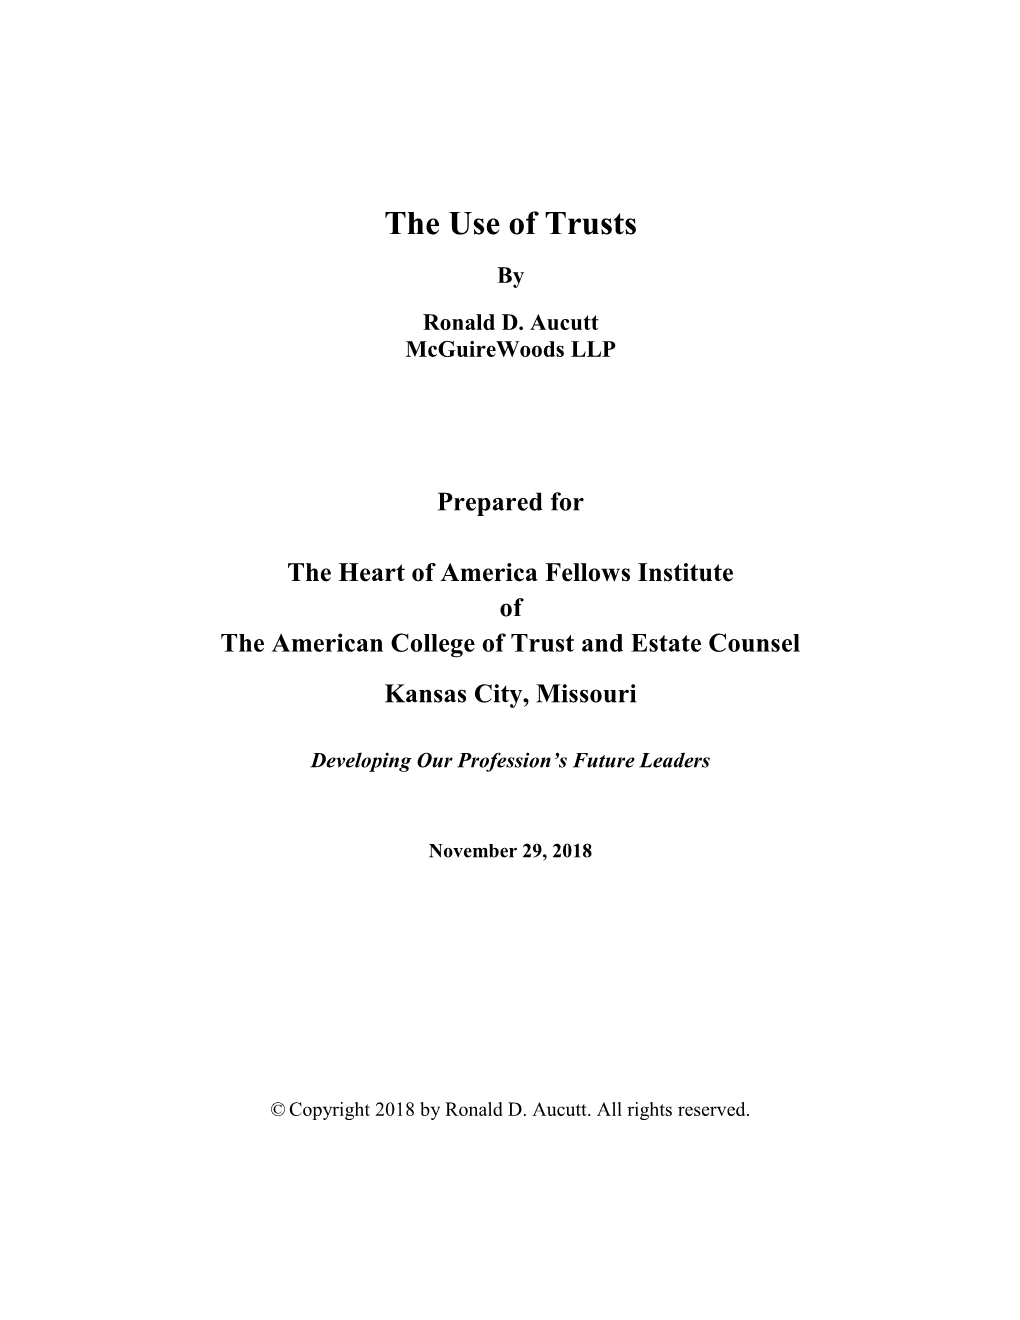 The Use of Trusts By